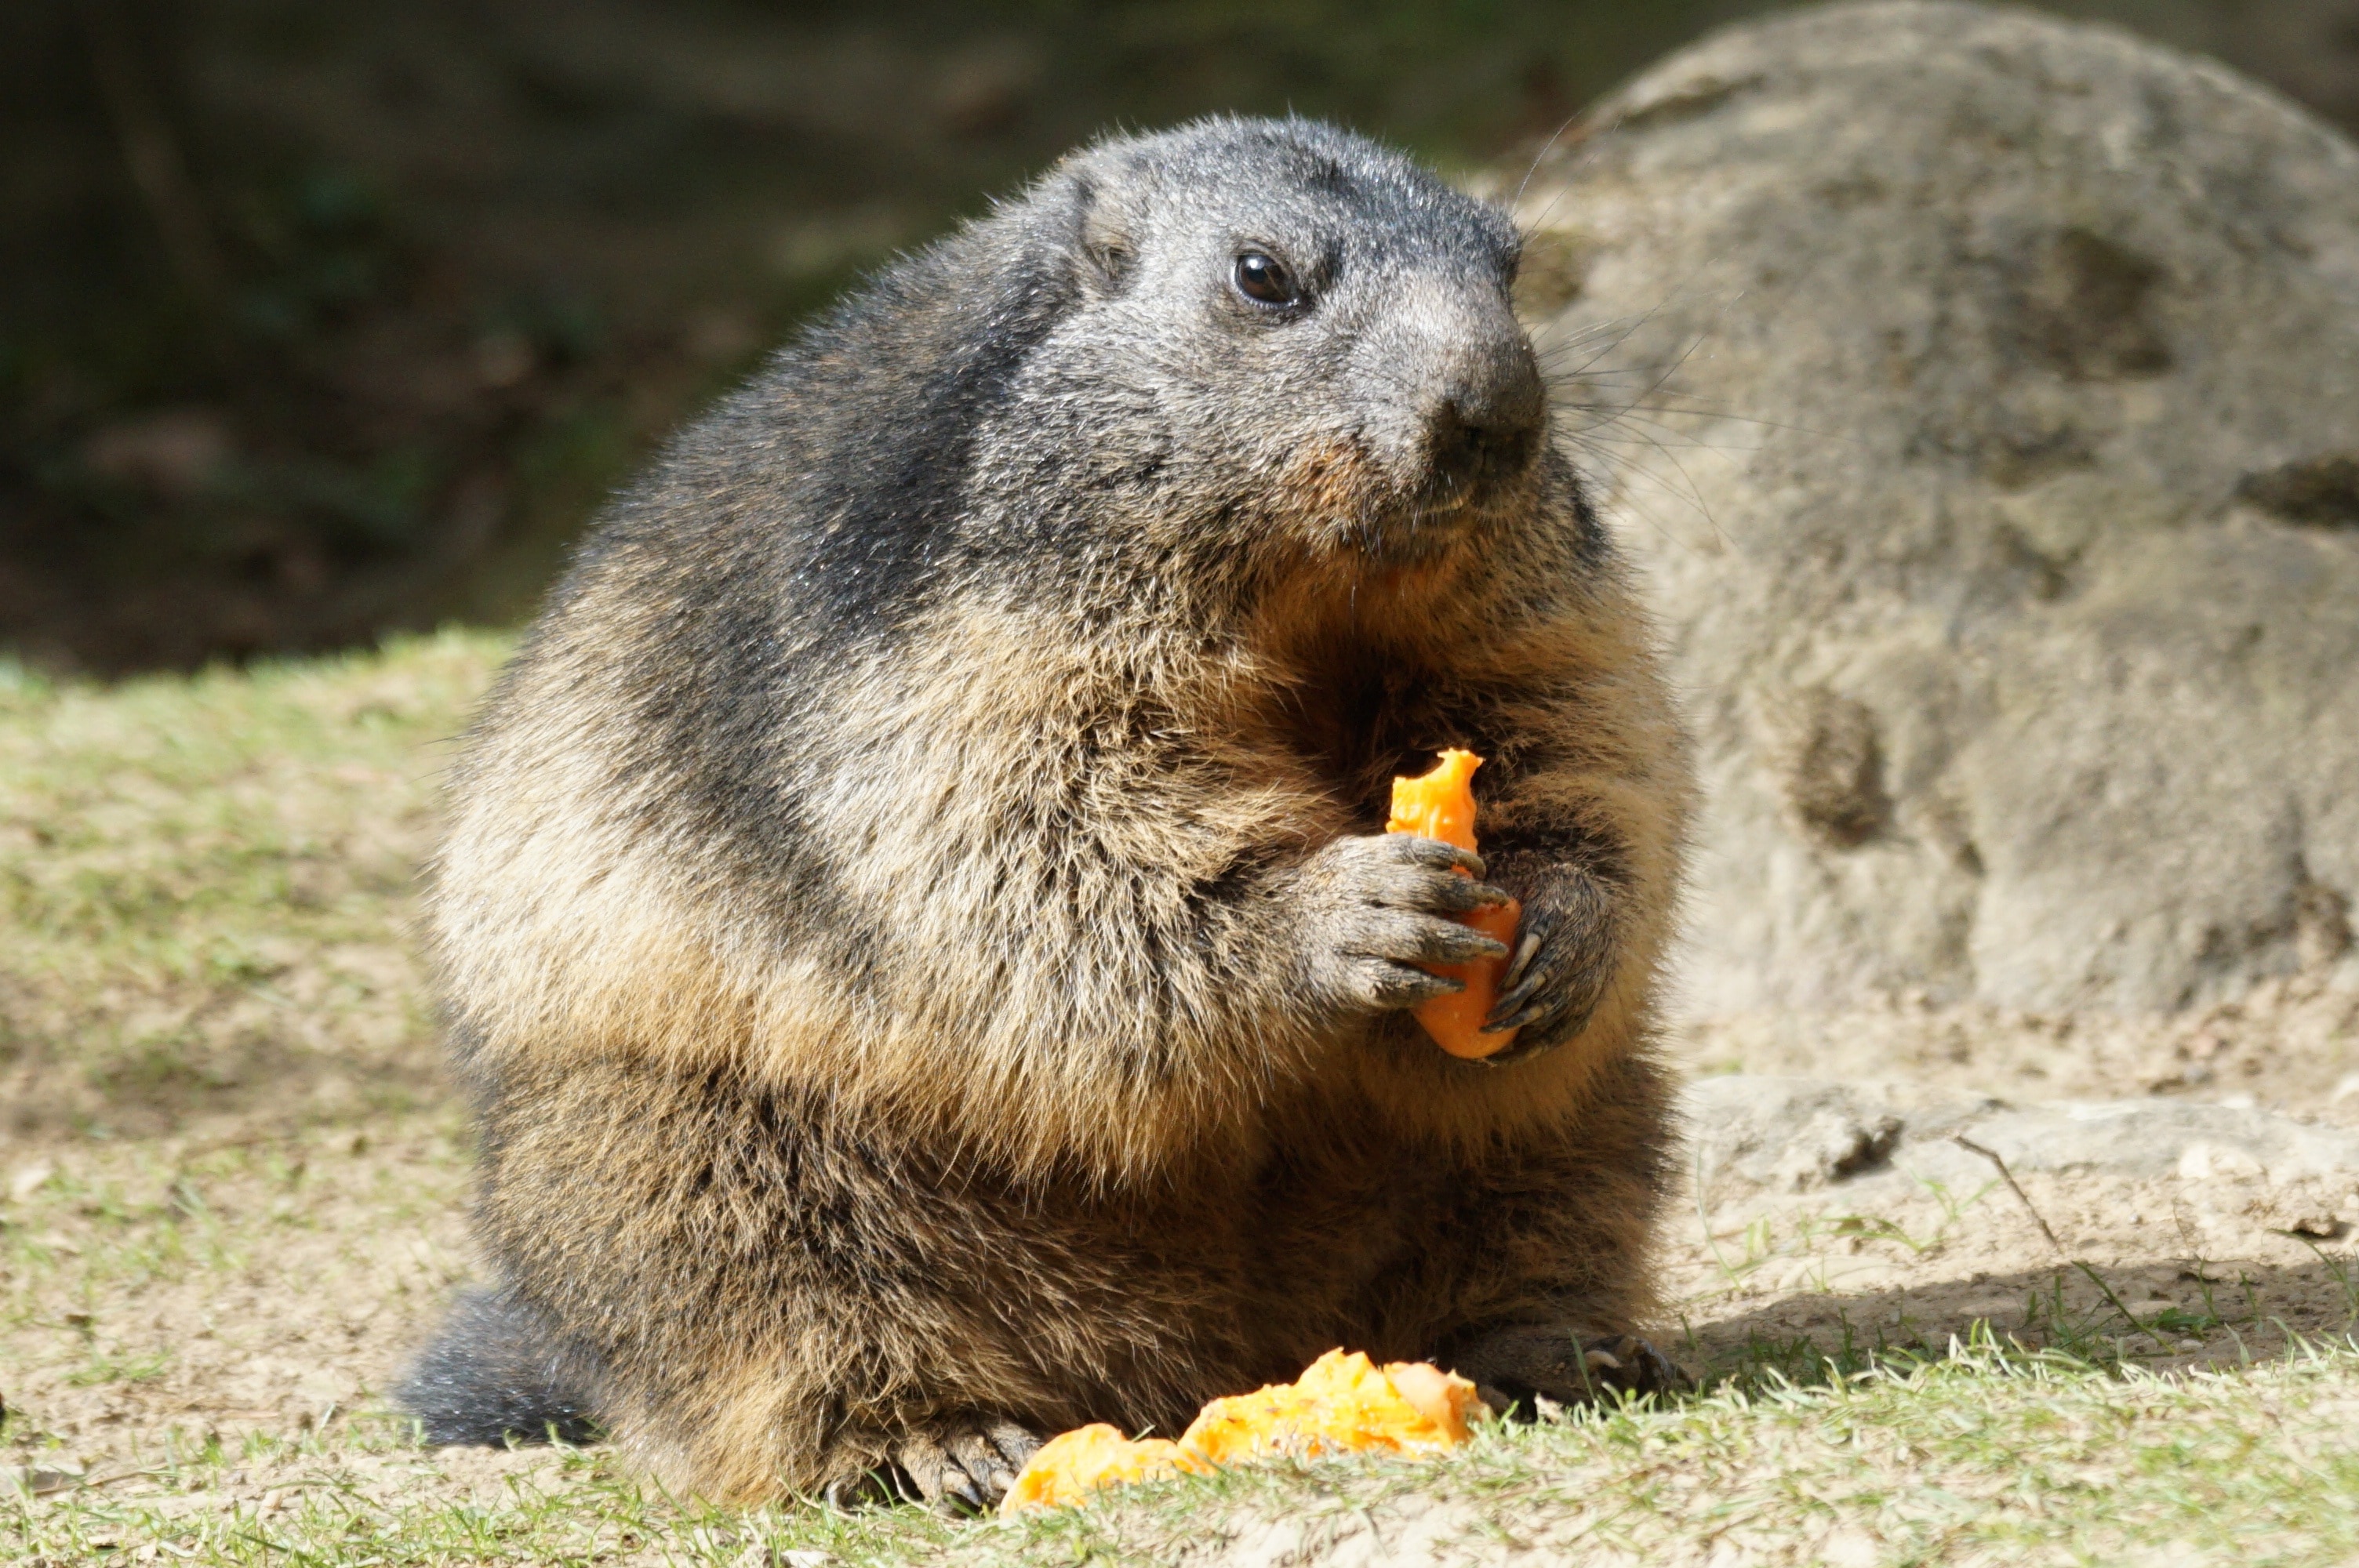 Close, Food, Marmot, Rodent, one animal, animals in the wild